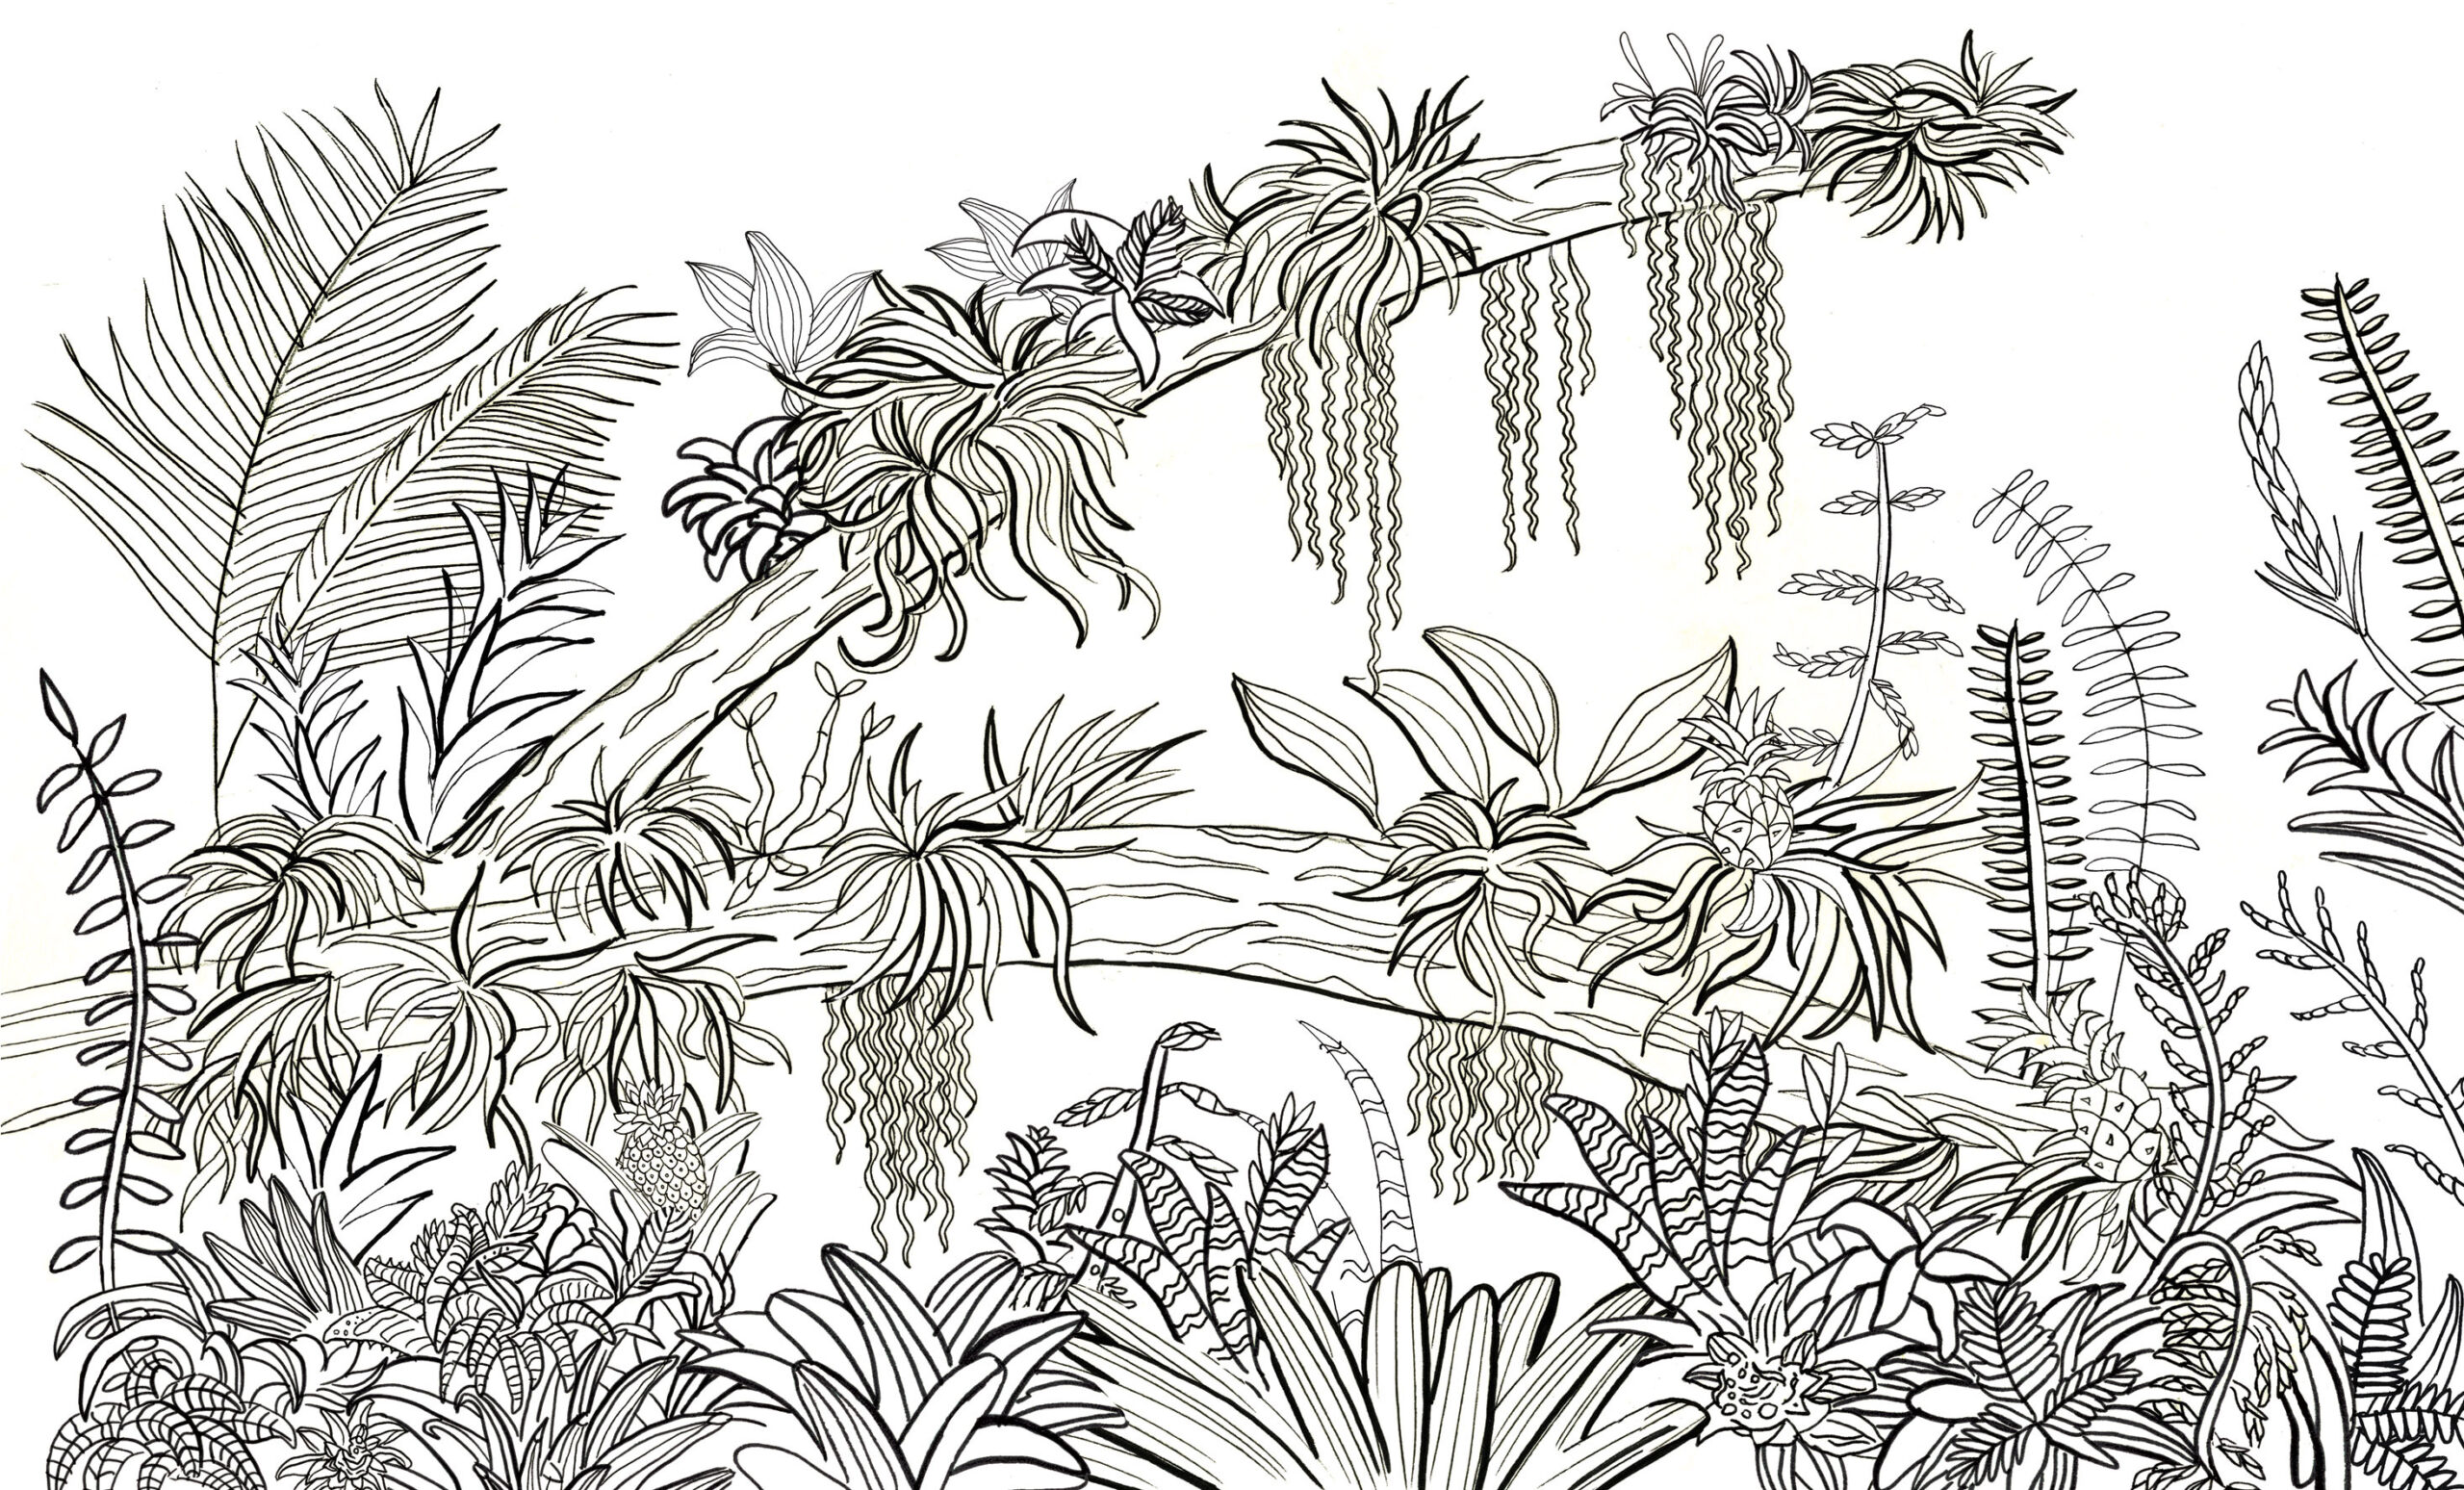 Kew Colouring Book Clair Rossiter Illustration intended for Kew Book Of Botanical Illustration